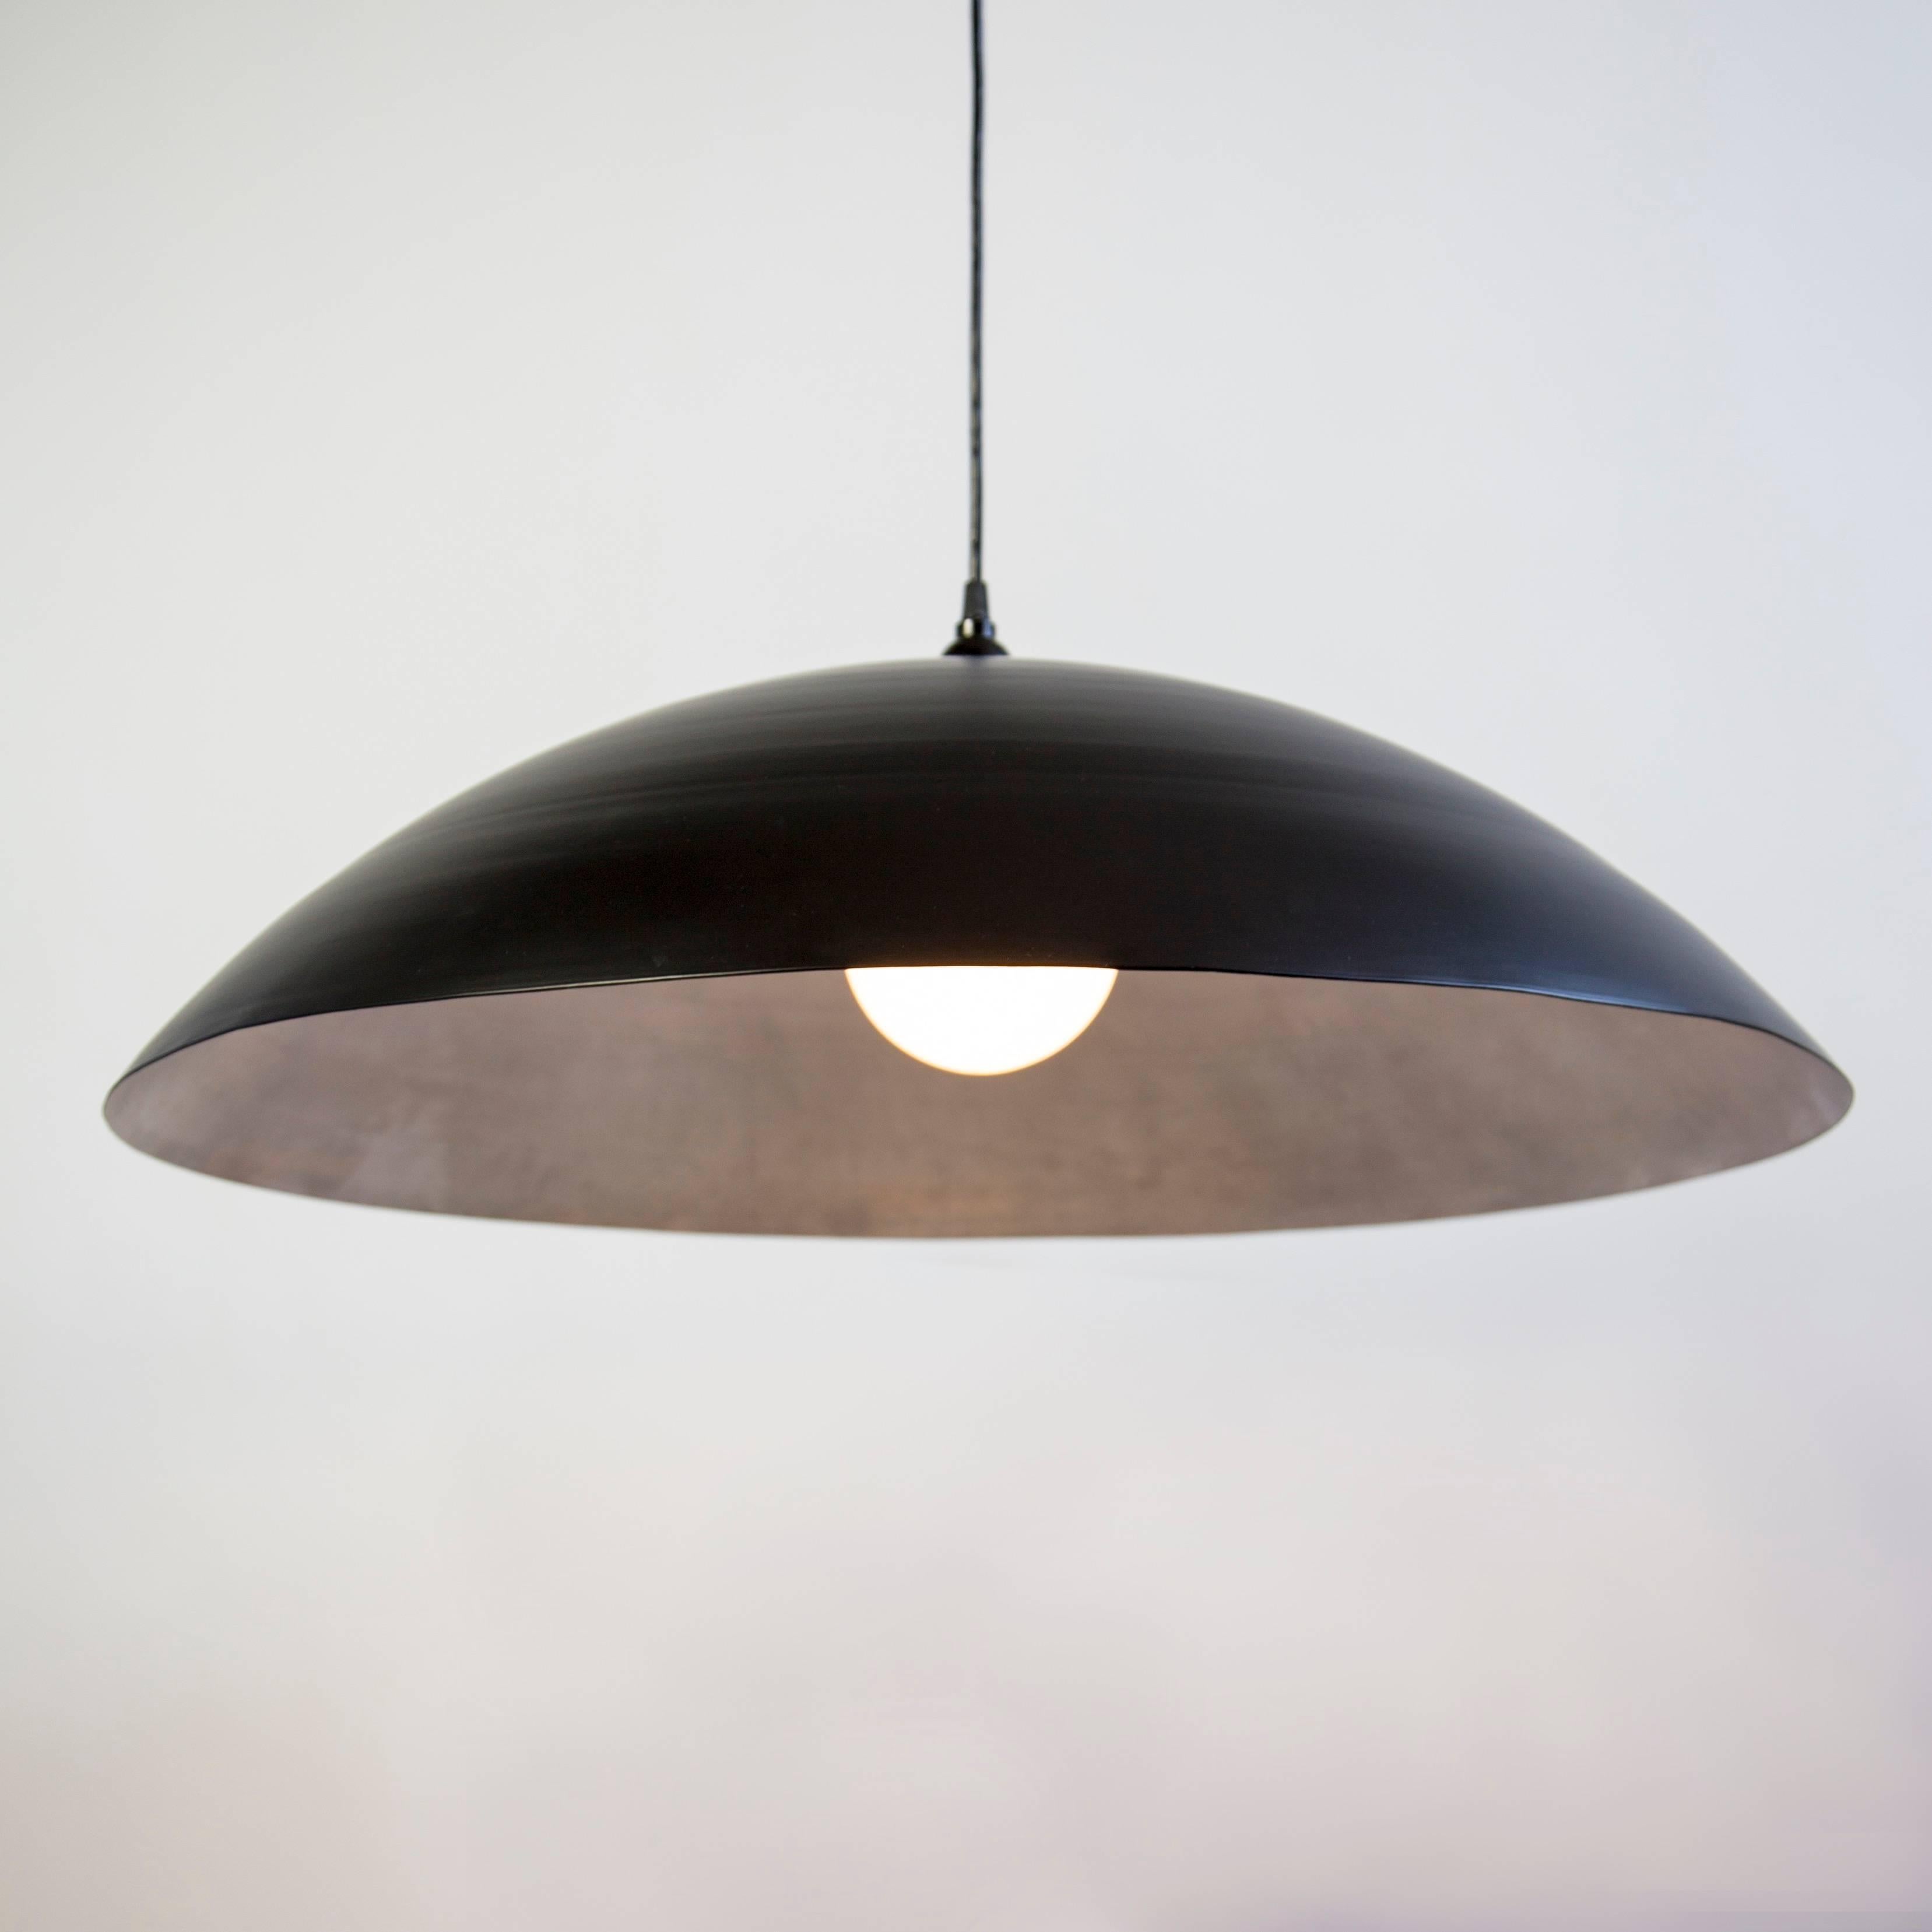 This listing is for 1x Industry Pendant in Flat Cream & Waxed Aluminum designed and manufactured by RESEARCH Lighting.

Materials: Aluminum
Finish: Exterior is powder coated in flat cream, interior is waxed aluminum
Electronics: 1x E26 Socket, G40